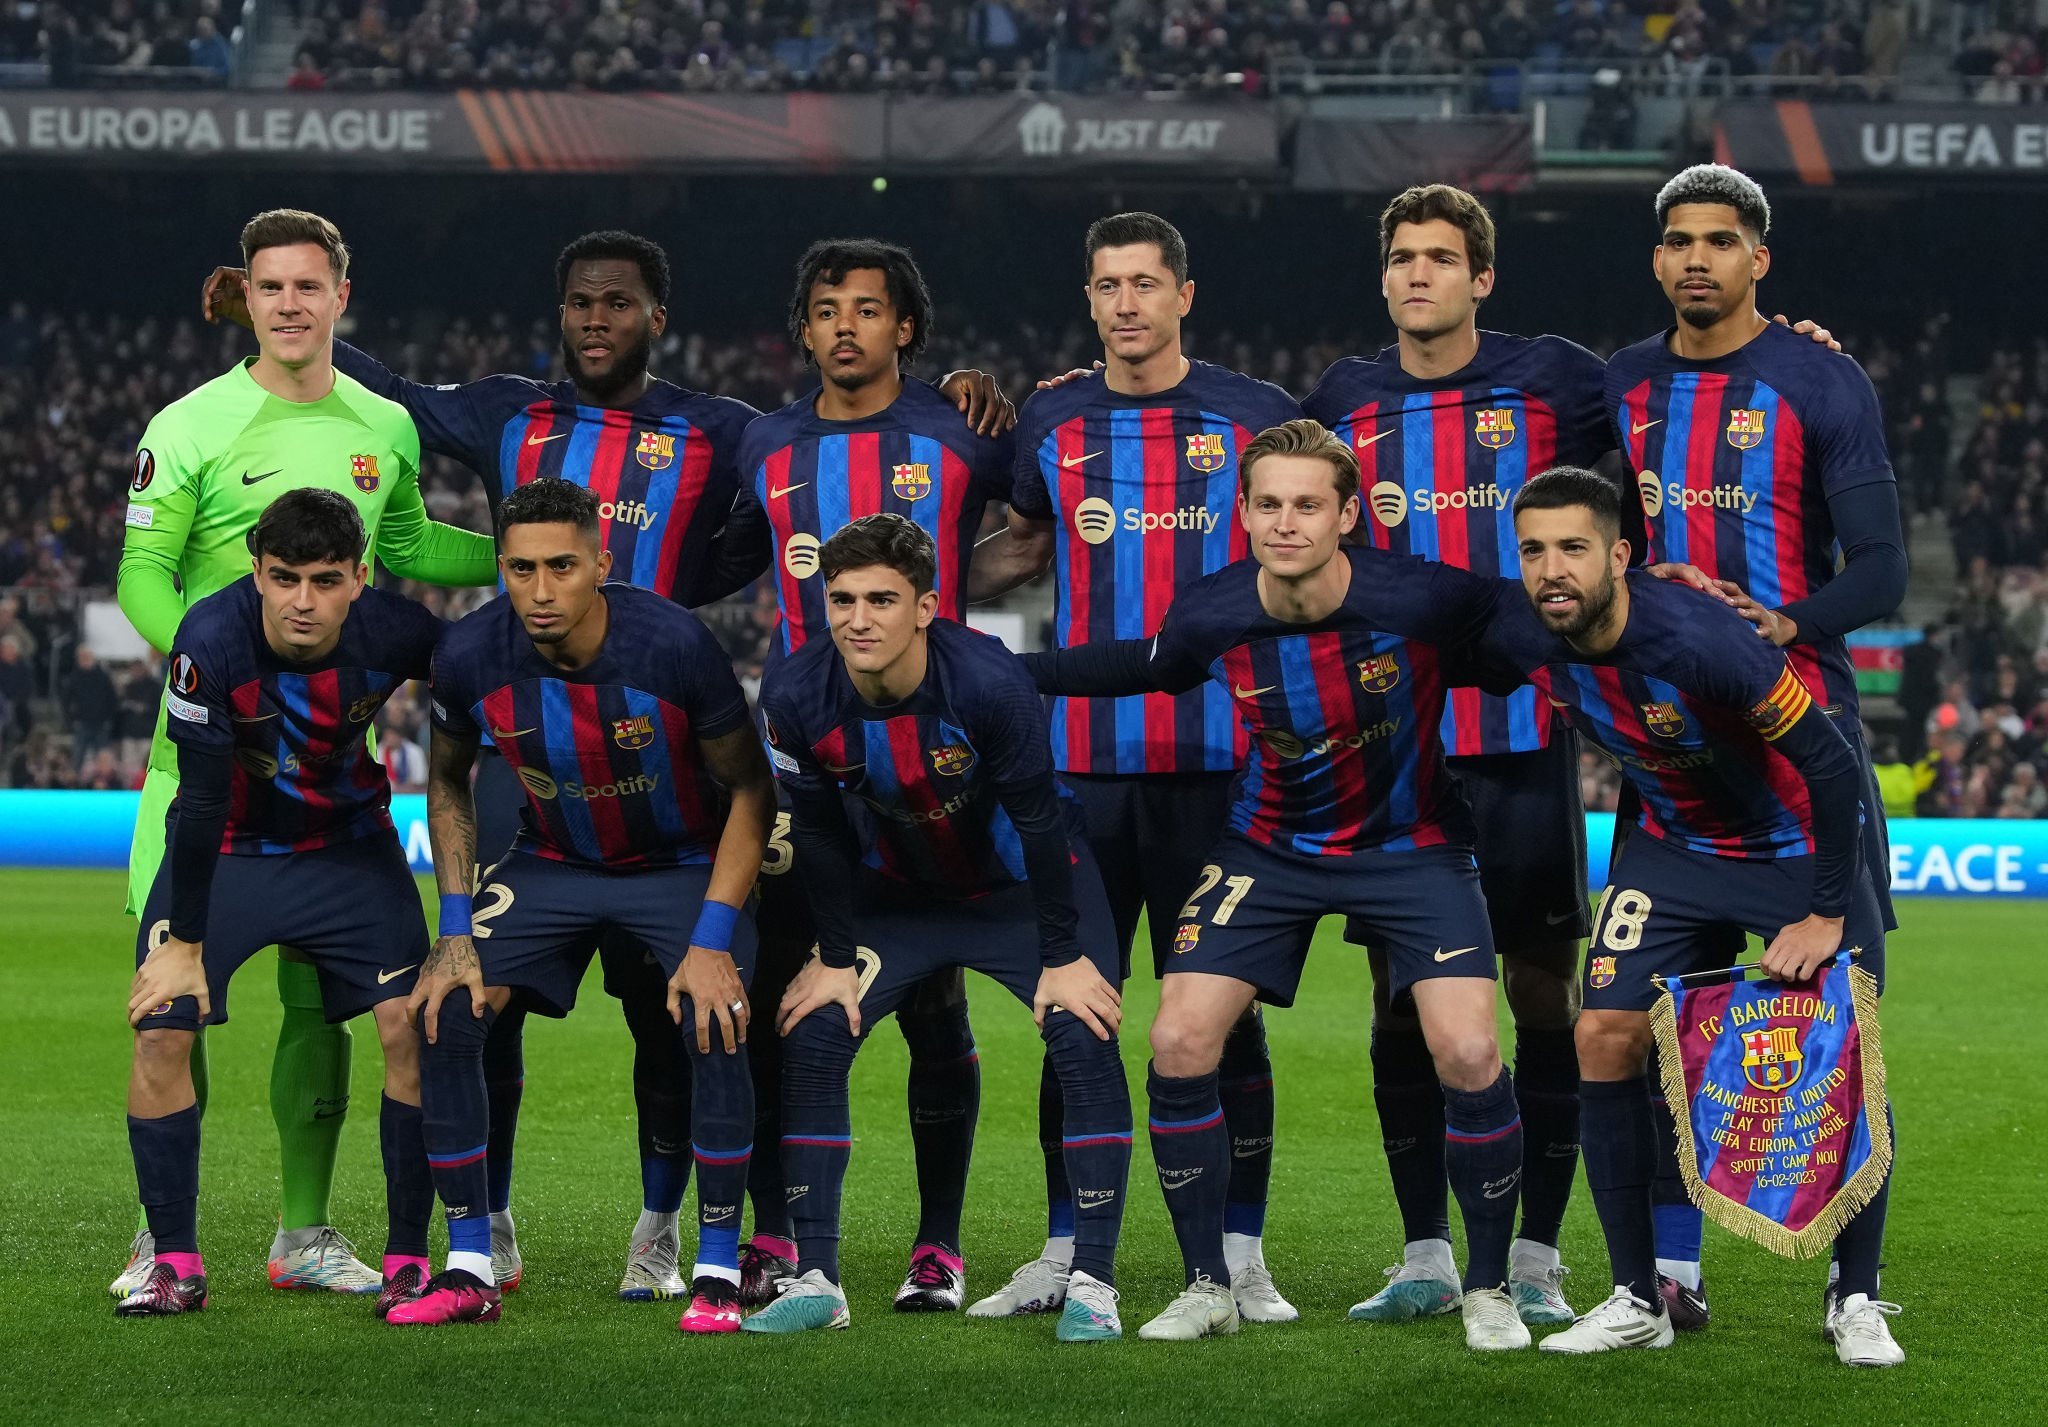 Barcelona's official squad against Manchester United in the Europa League